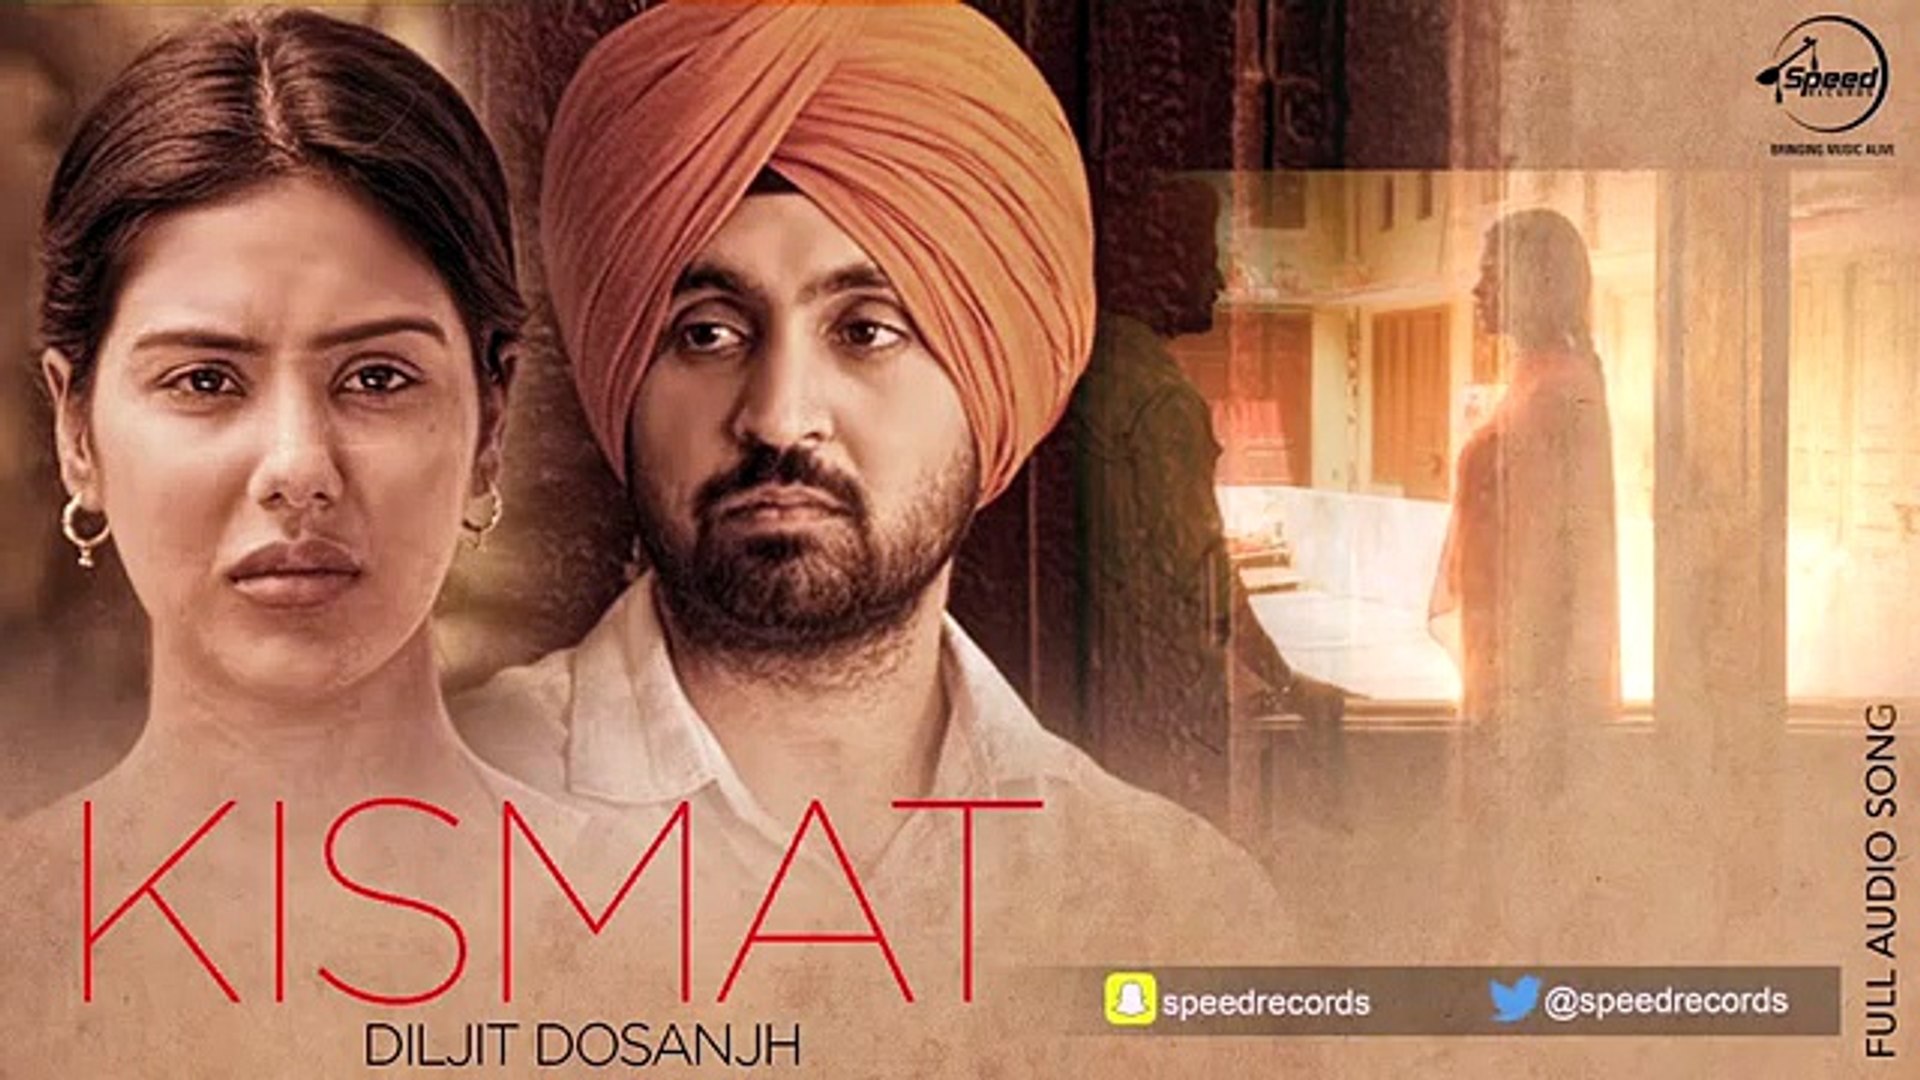 Kismat Full Song Diljit Dosanjh Punjabi Song Collection Video Dailymotion Kismat is the romantic drama punjabi movie this movie is directed by jagdeep sidhu and this new punjabi movie 2020 latest movie 2020 new punjabi movies 2020 full hd movies gippy grewal new. kismat full song diljit dosanjh punjabi song collection